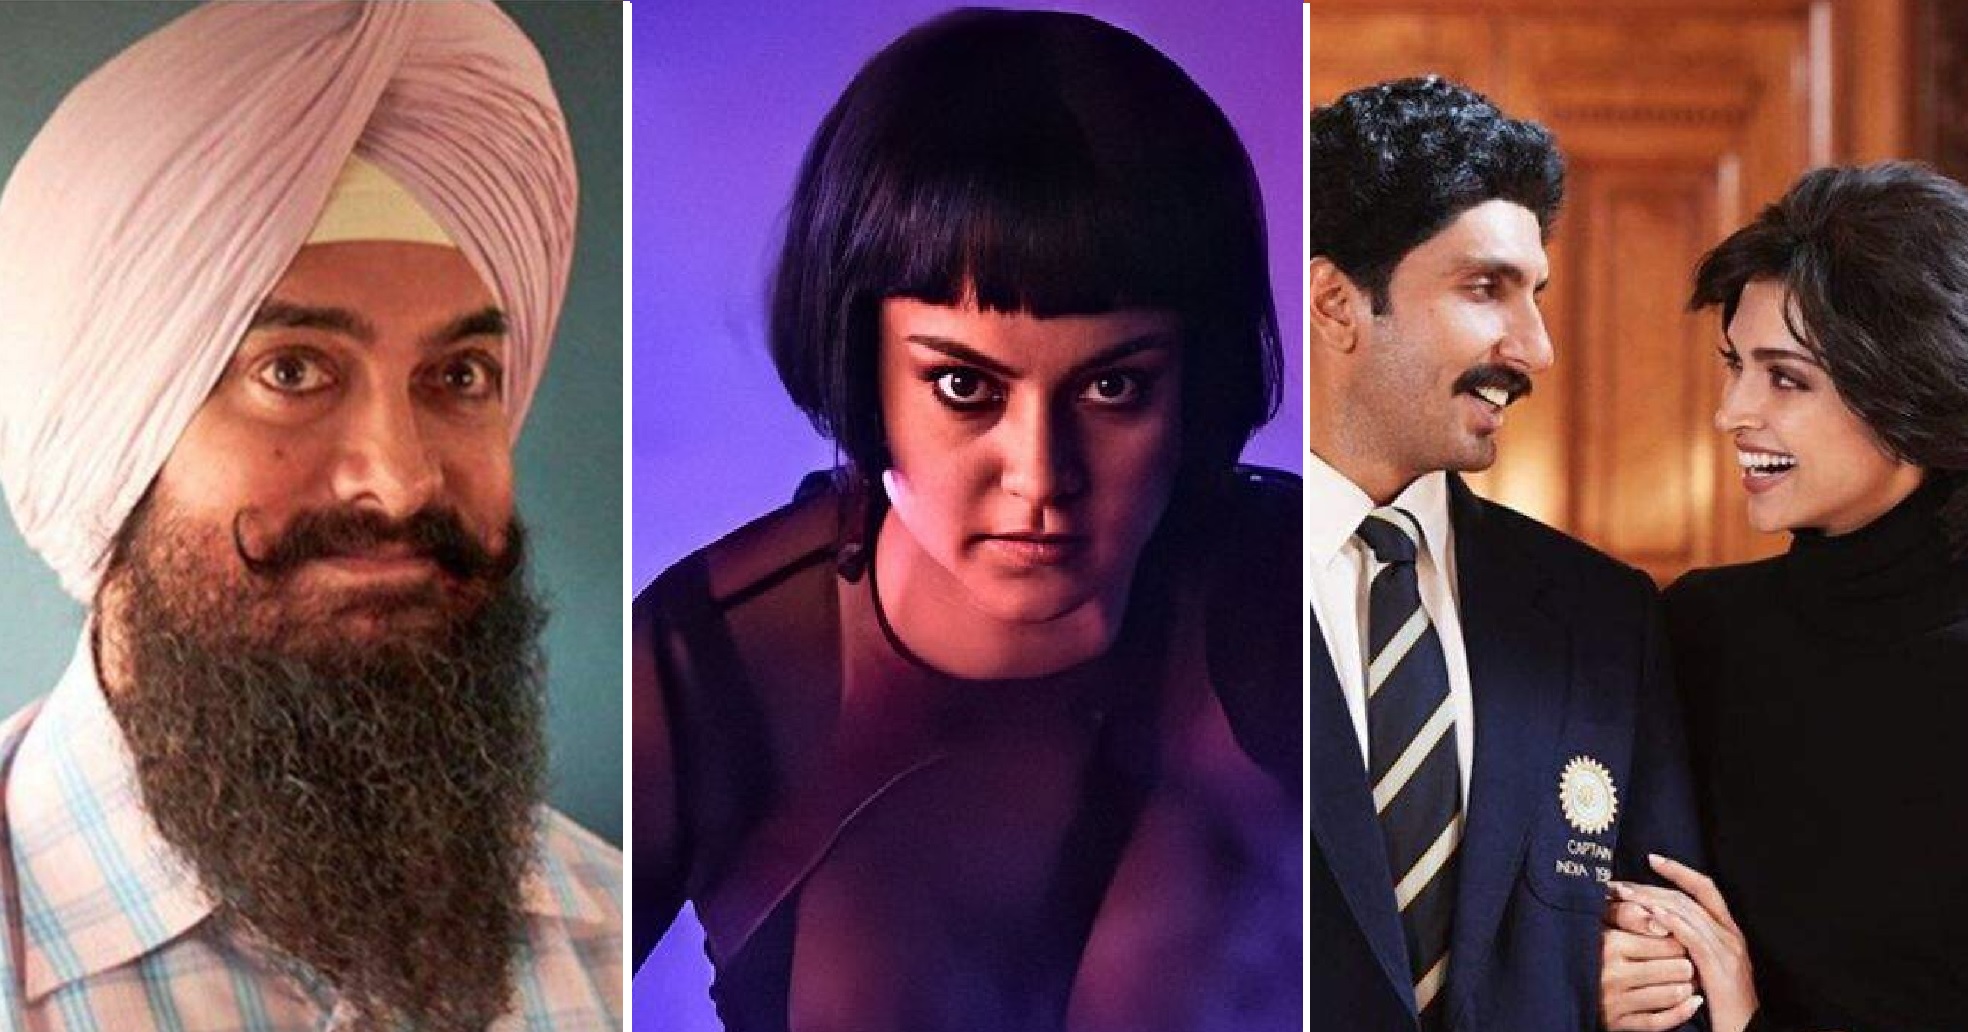 From ’83’ to ‘Laal Singh Chaddha’ – Which Upcoming Bollywood Film Are You Excited To Watch The Most? Vote Here!